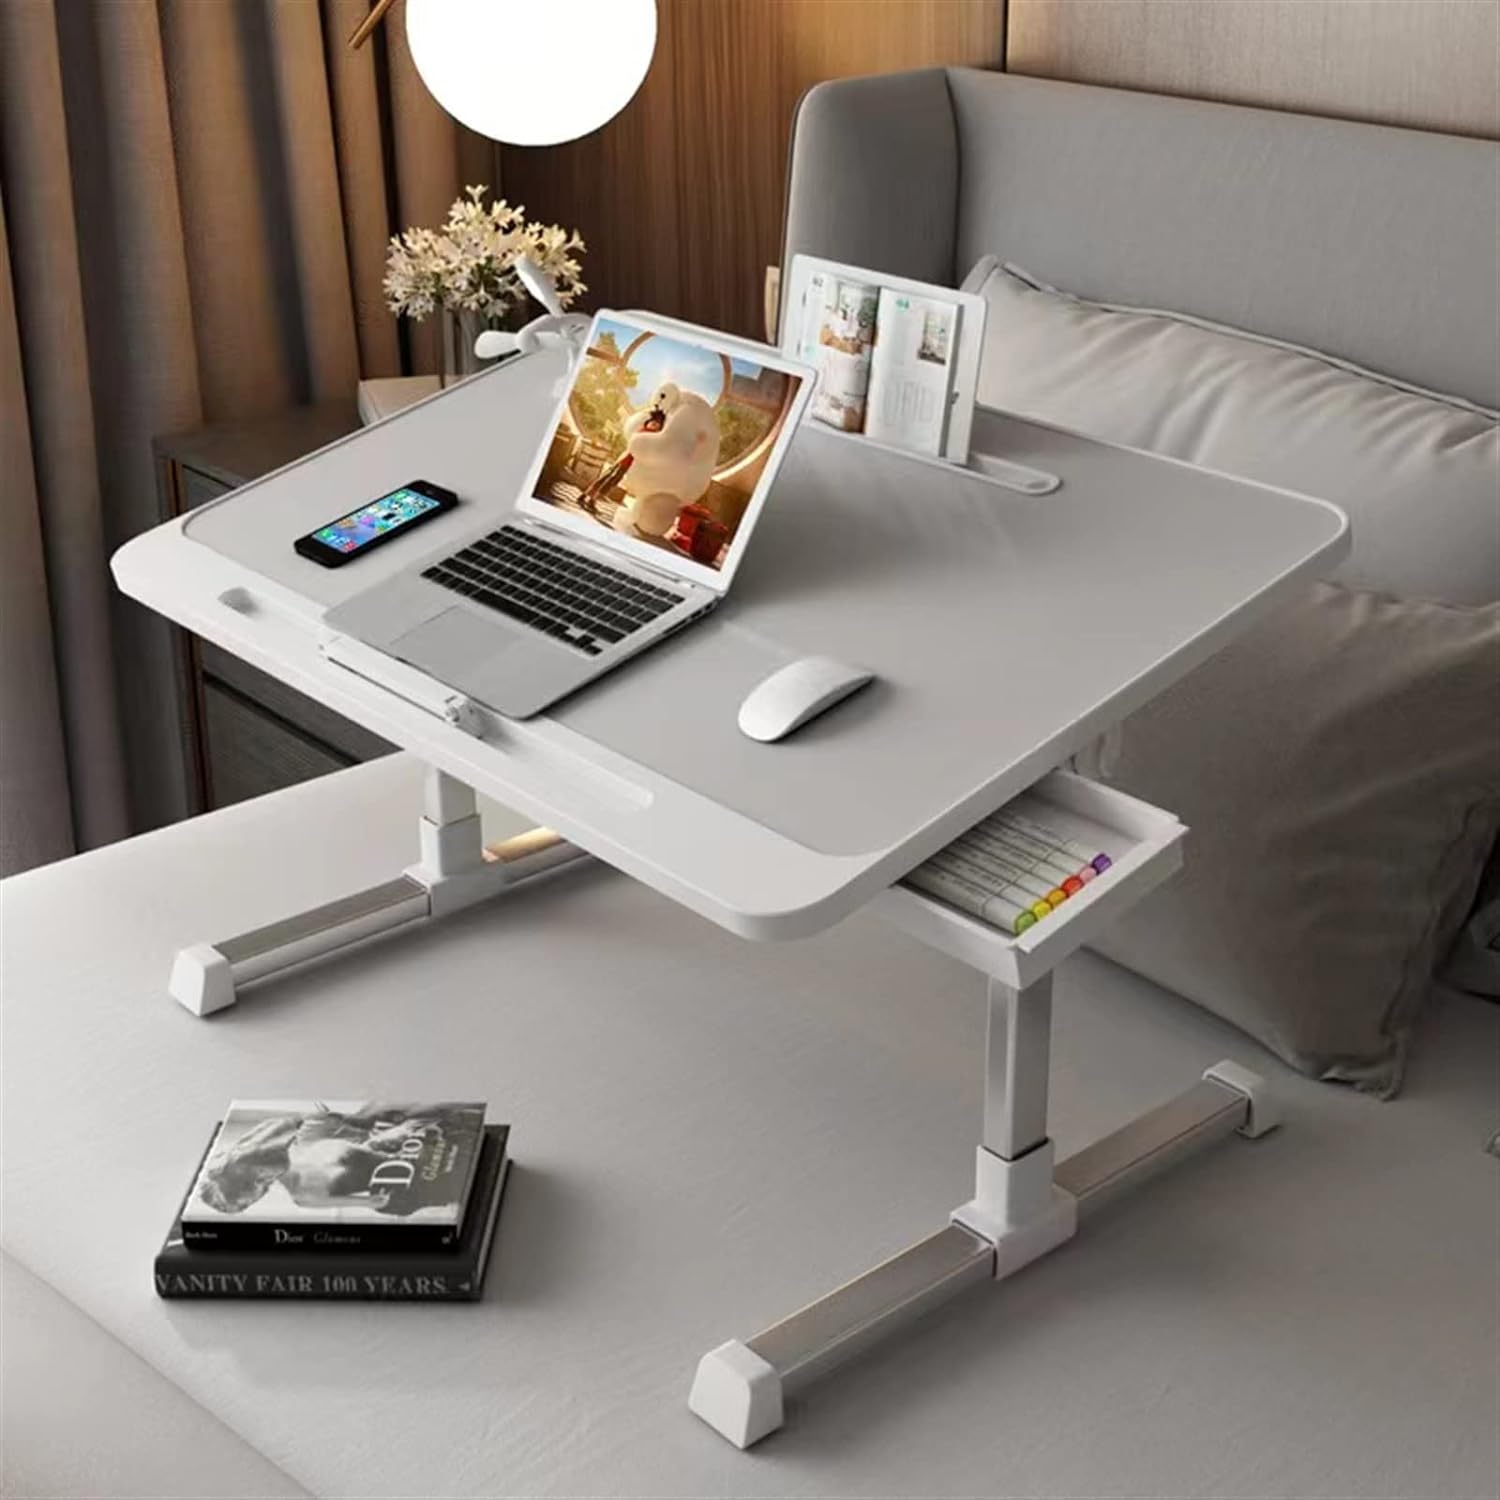 A small mobile desk on the bed, white, for multi-use